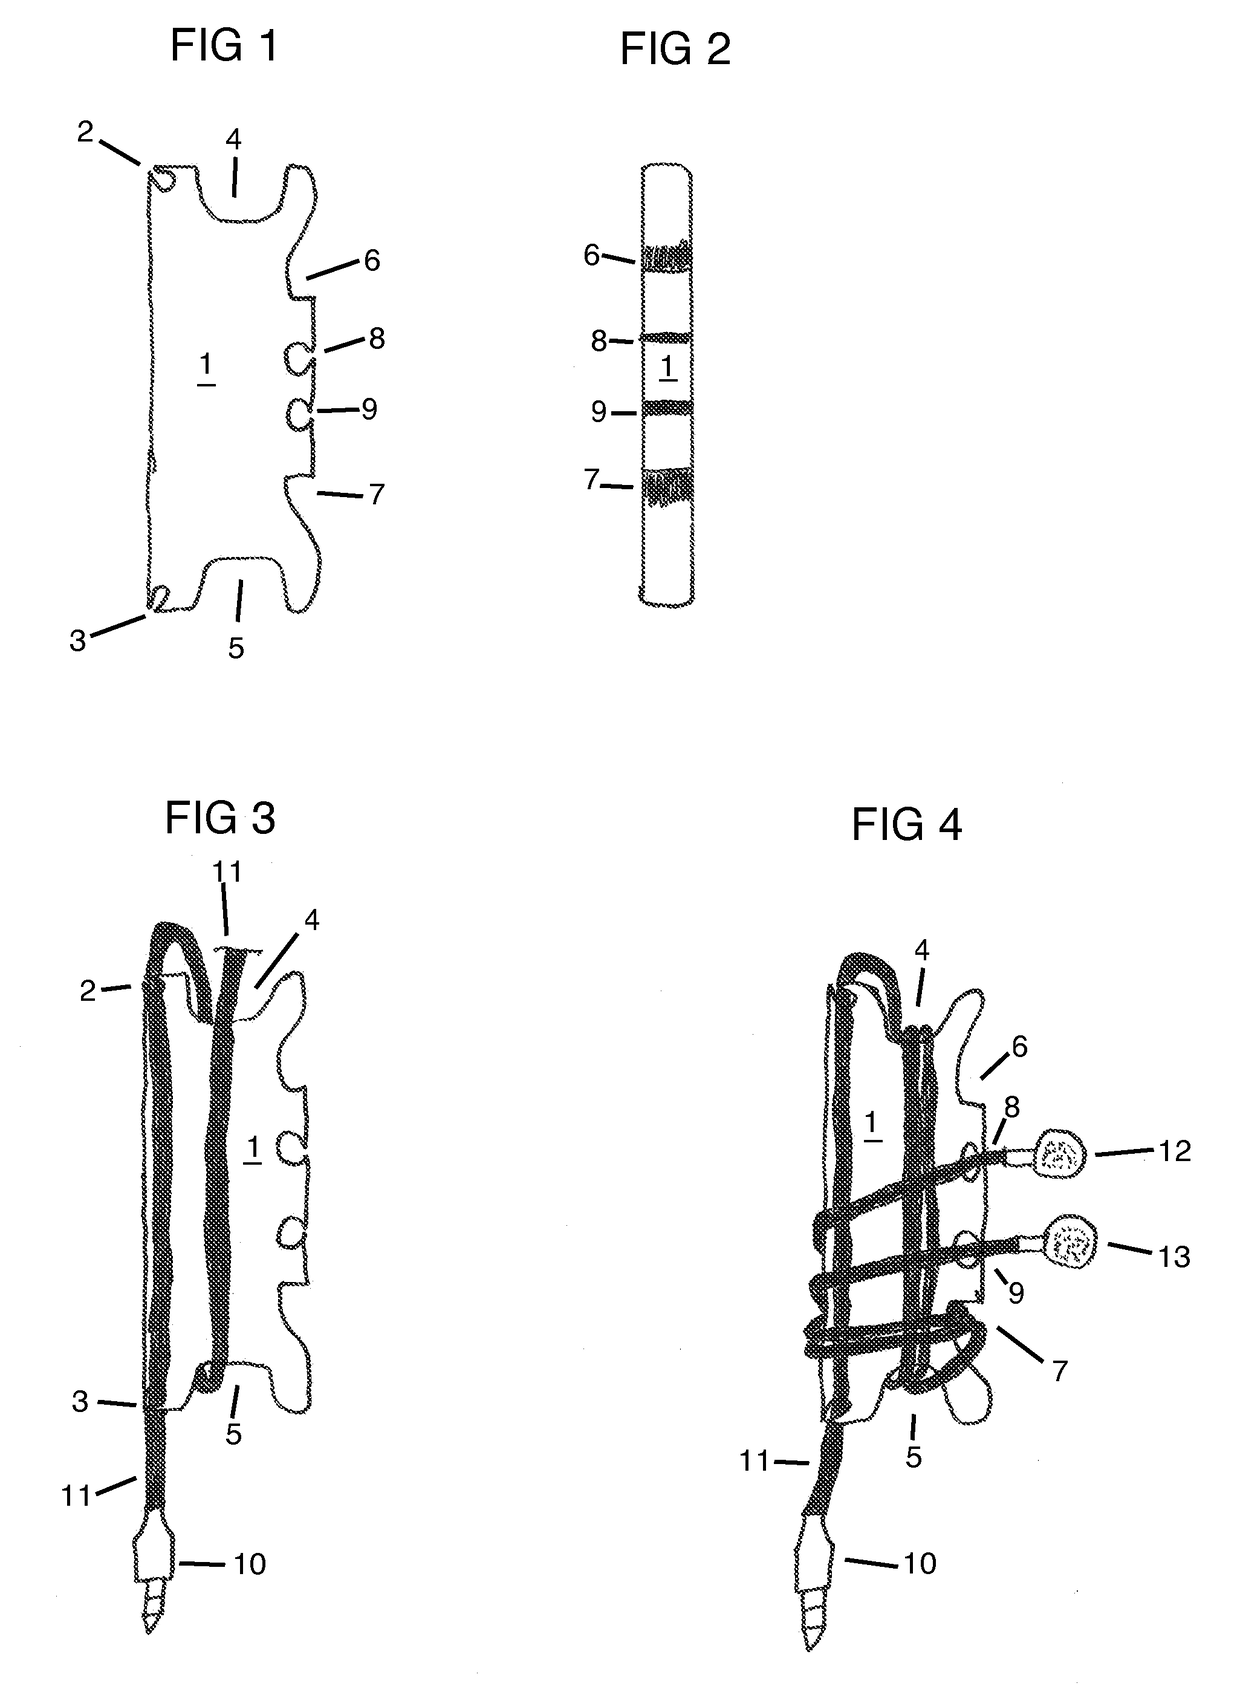 Apparatus for Managing Personal Electronic Accessory Cords